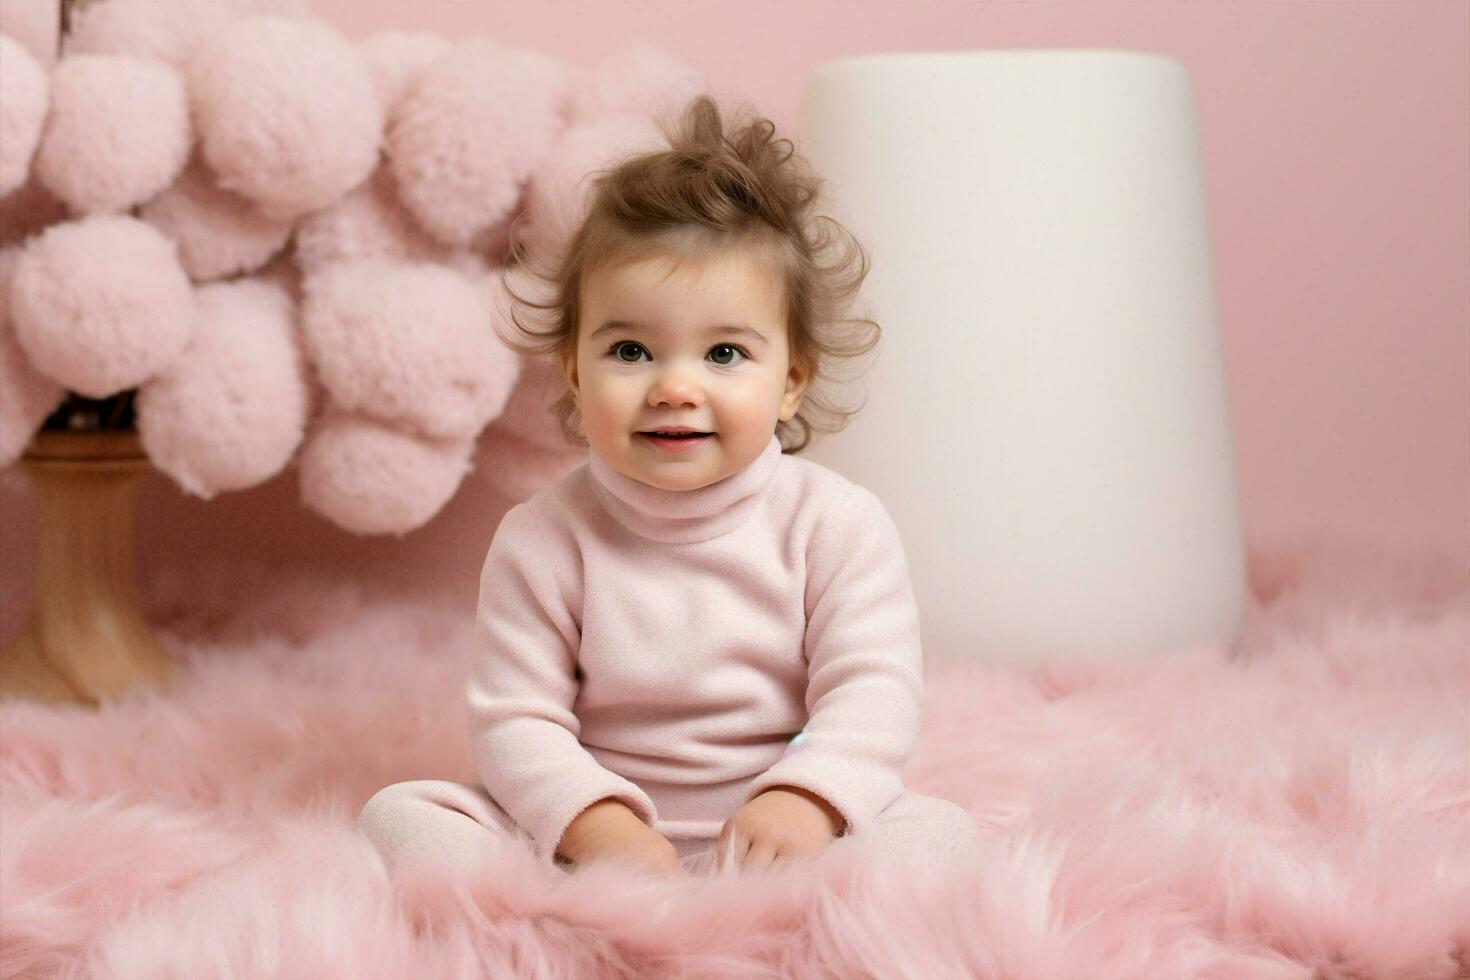 Baby little face children bear beautiful small kids cute lifestyle childhood girl toy pink photo